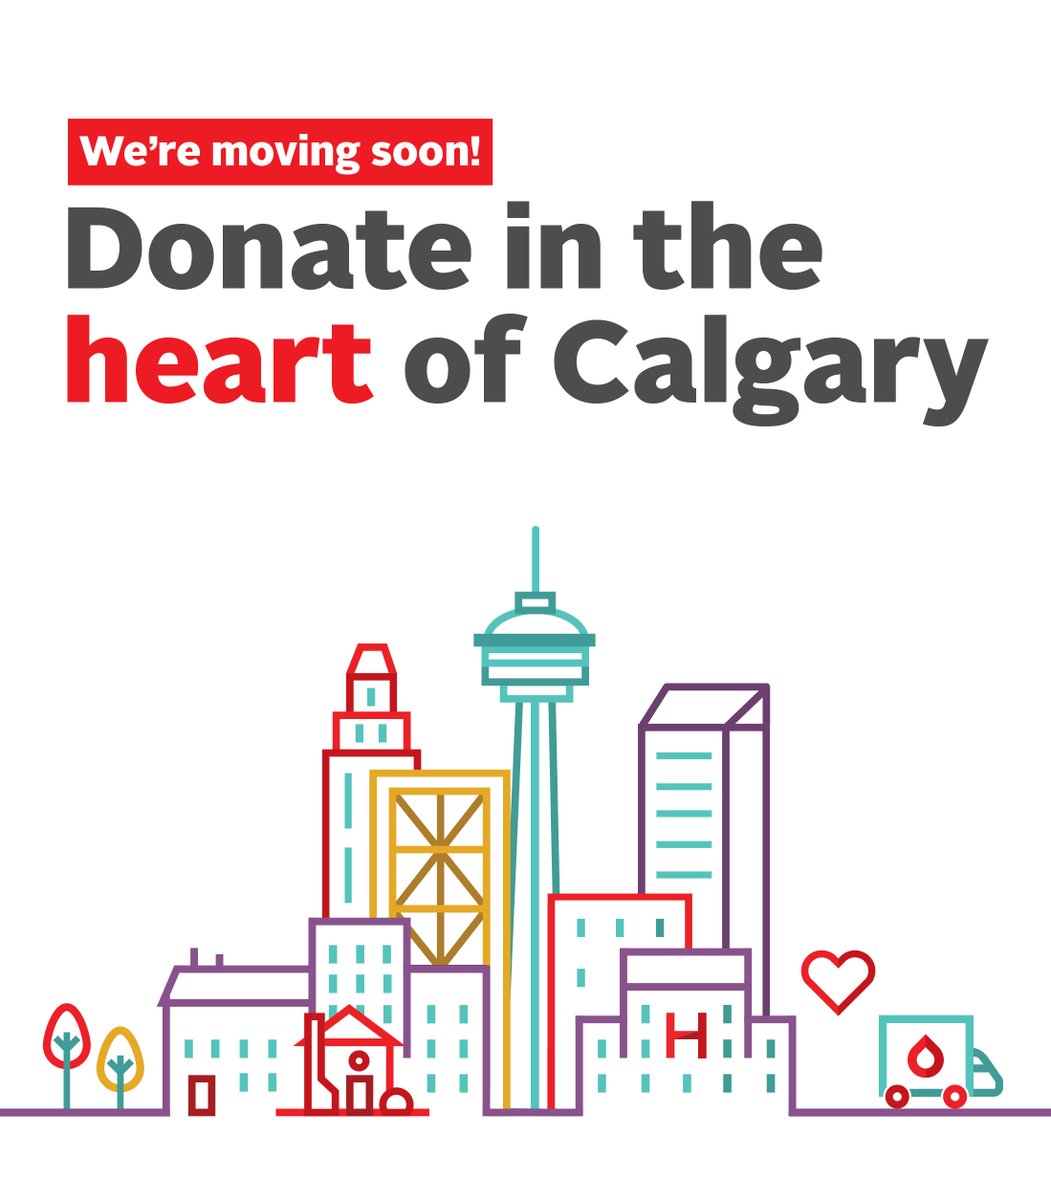 We’re moving our Calgary donor centre to the heart of the city at 207 - 9th Avenue SW, Penn West Plaza (East Tower)! Until the new location opens, please continue to donate at the Eau Claire Market. To book, please visit ow.ly/rF5c50RnbK4, or on the GiveBlood app.